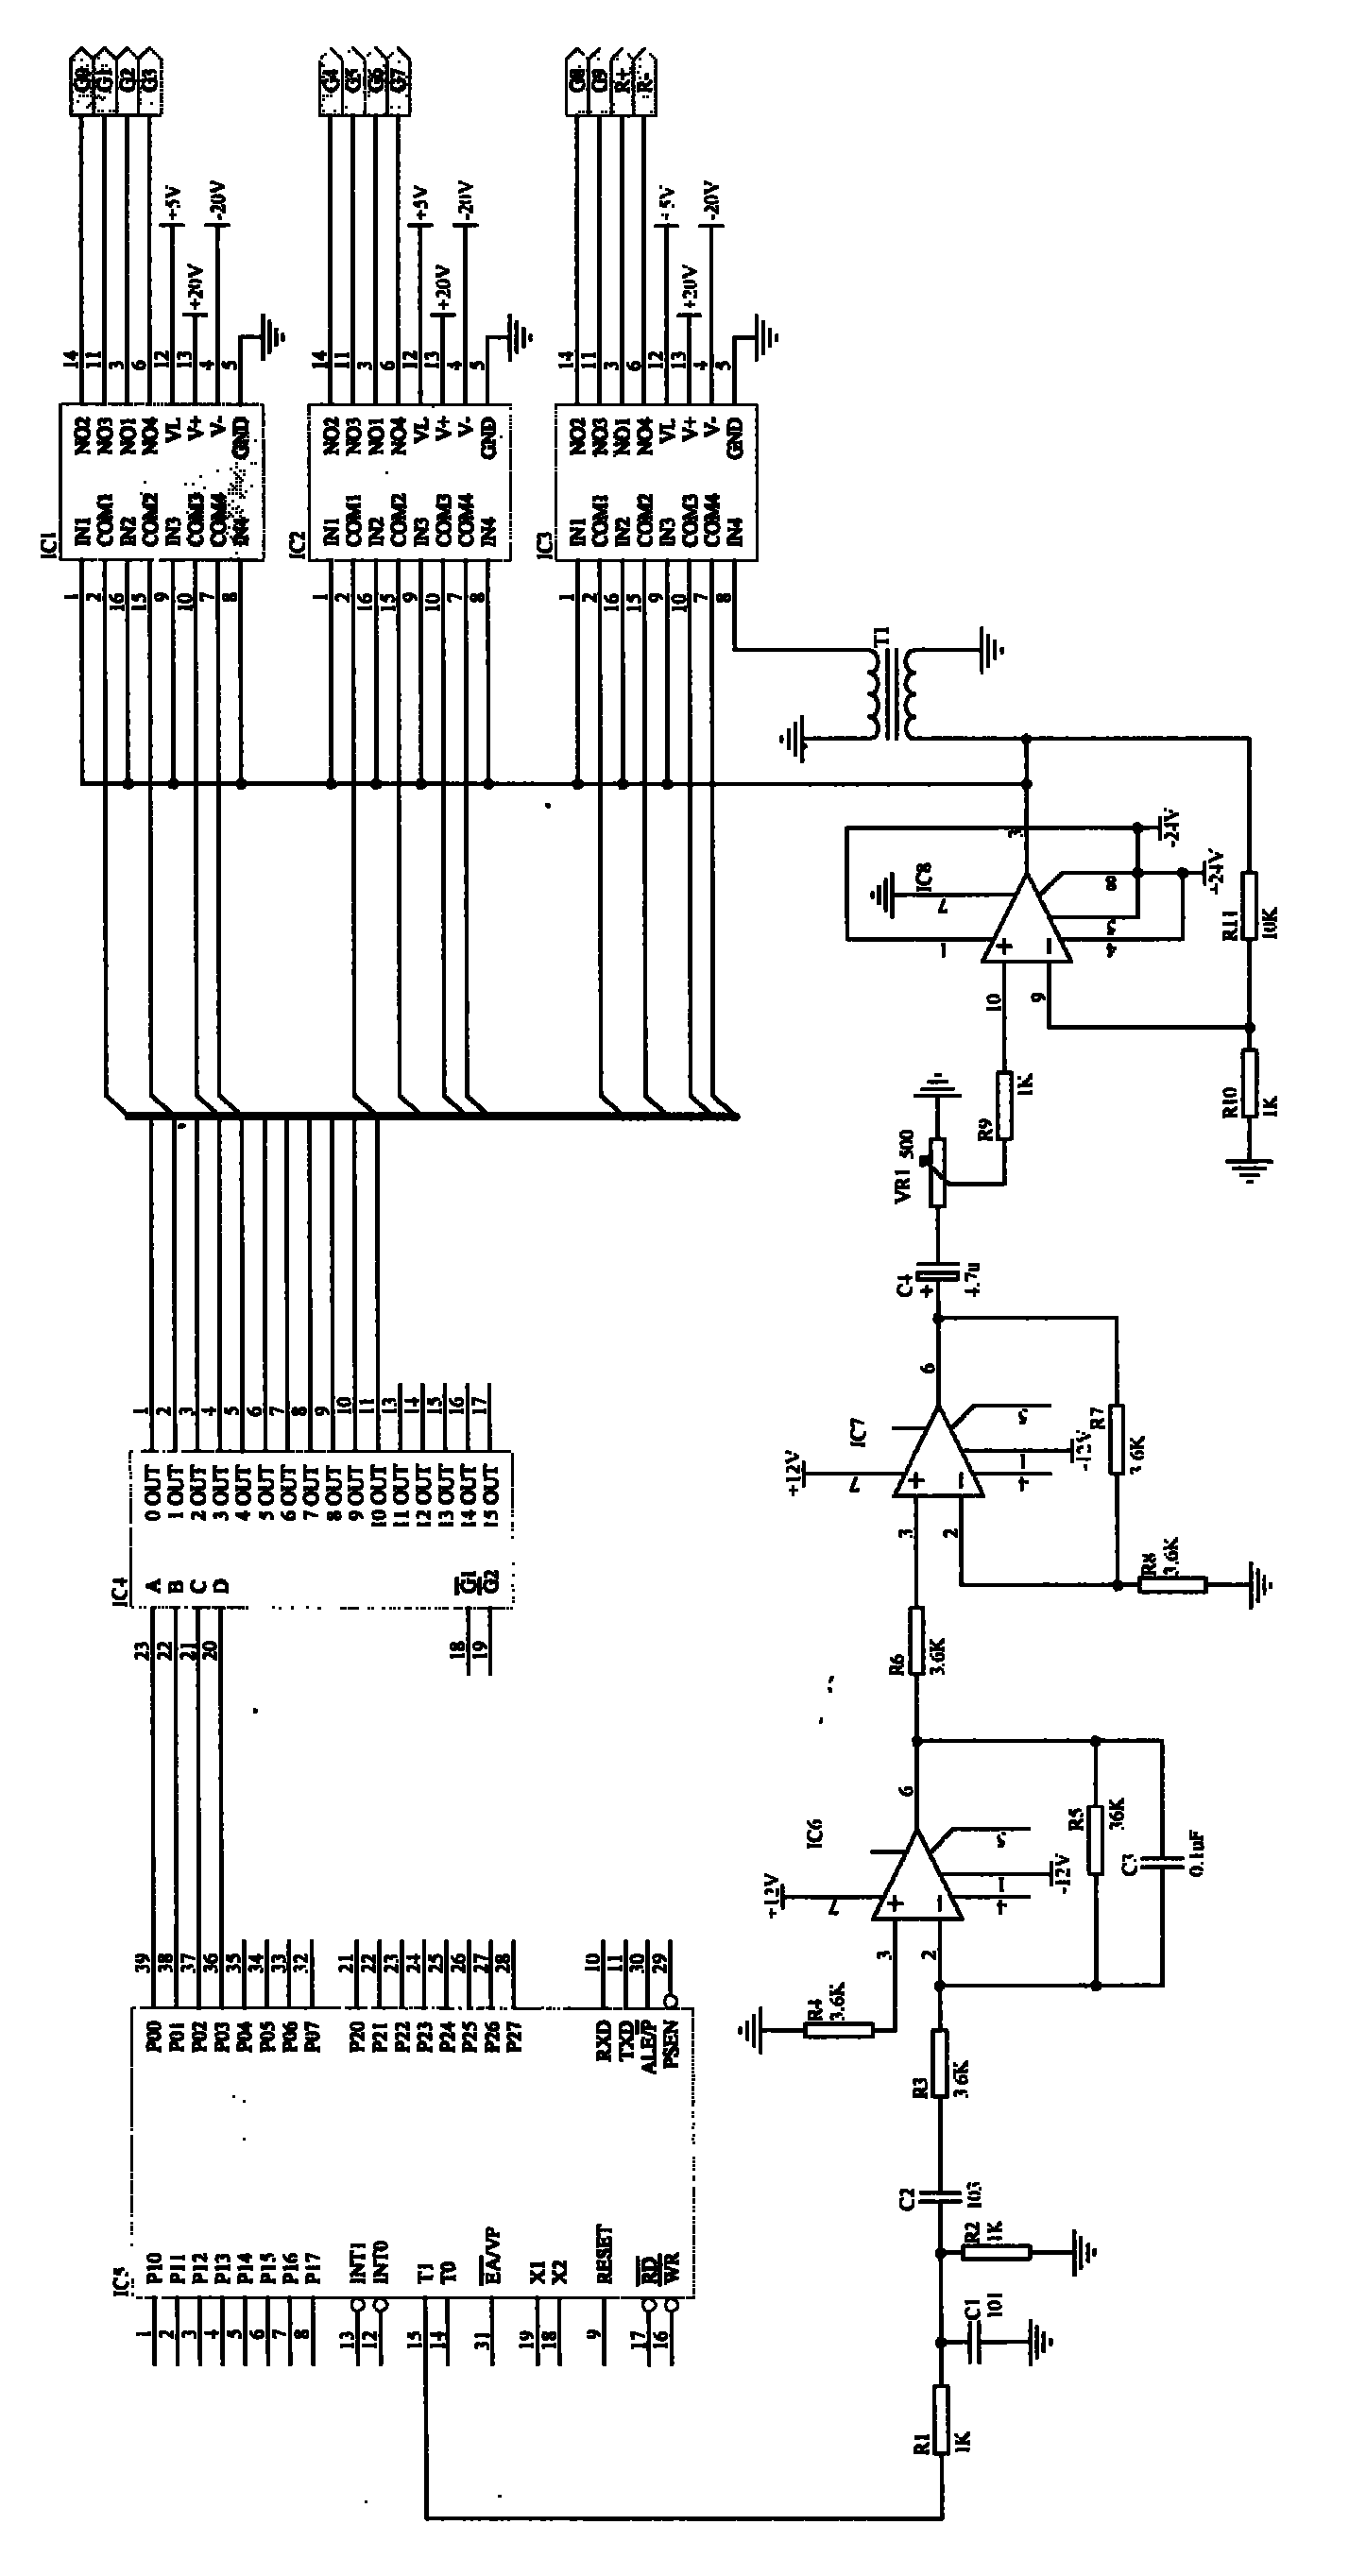 Automatic positioning control method of belt pulley trolley for coal blending in coking plant